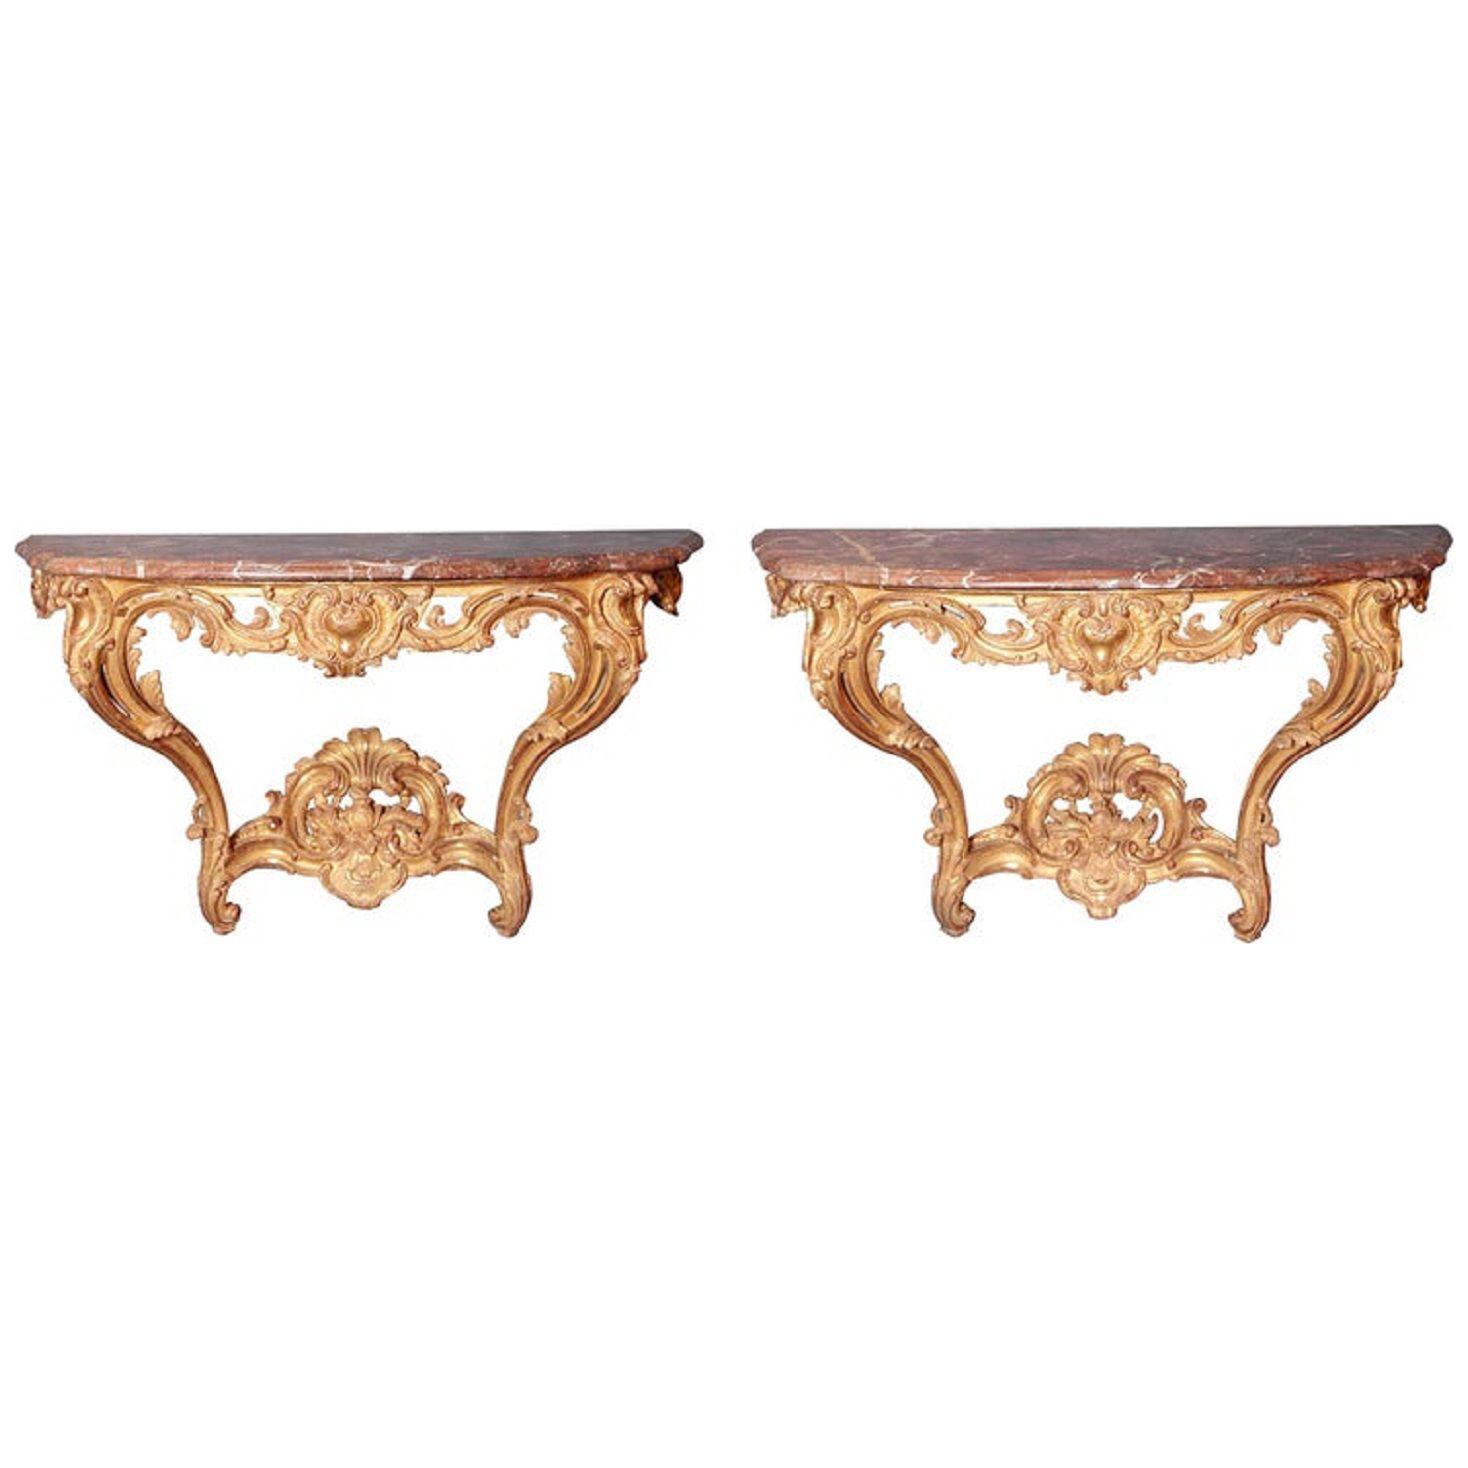 A Pair of Louis XV Period Wall Mount Console Tables, circa 1740